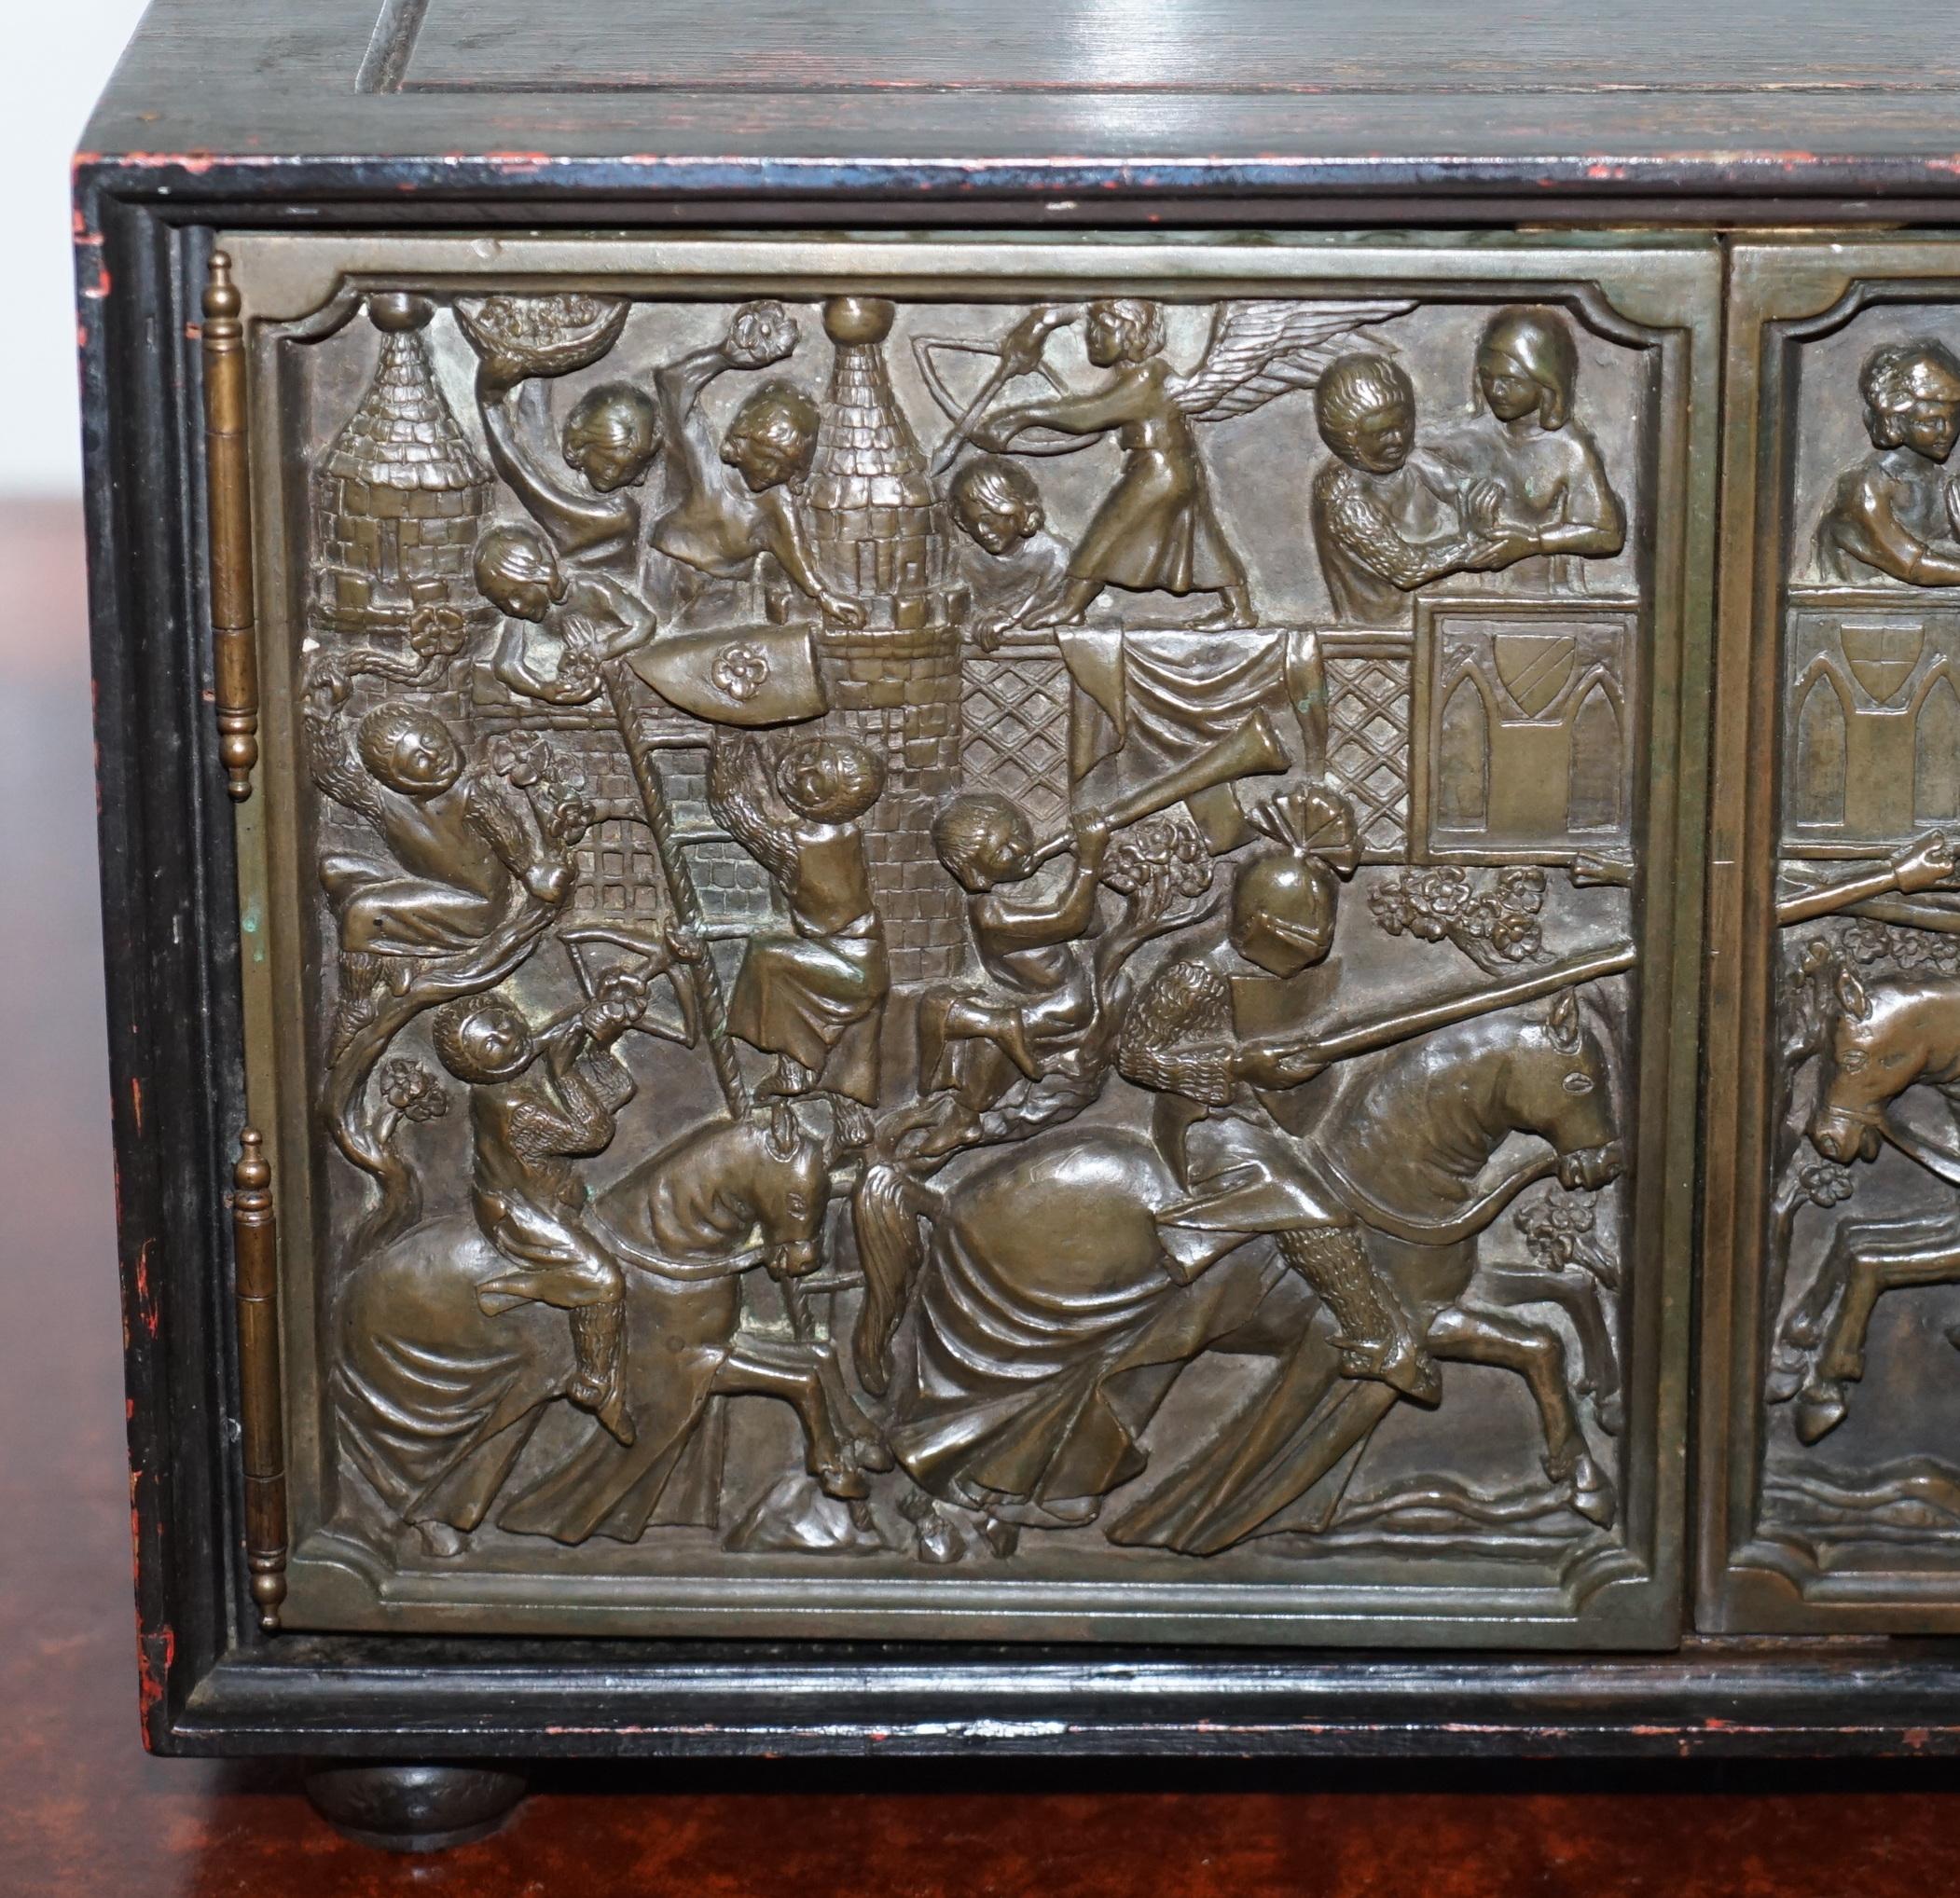 English Nice Small Cabinet or Cupboard with Bronze Doors Depicting a Jousting Tournament